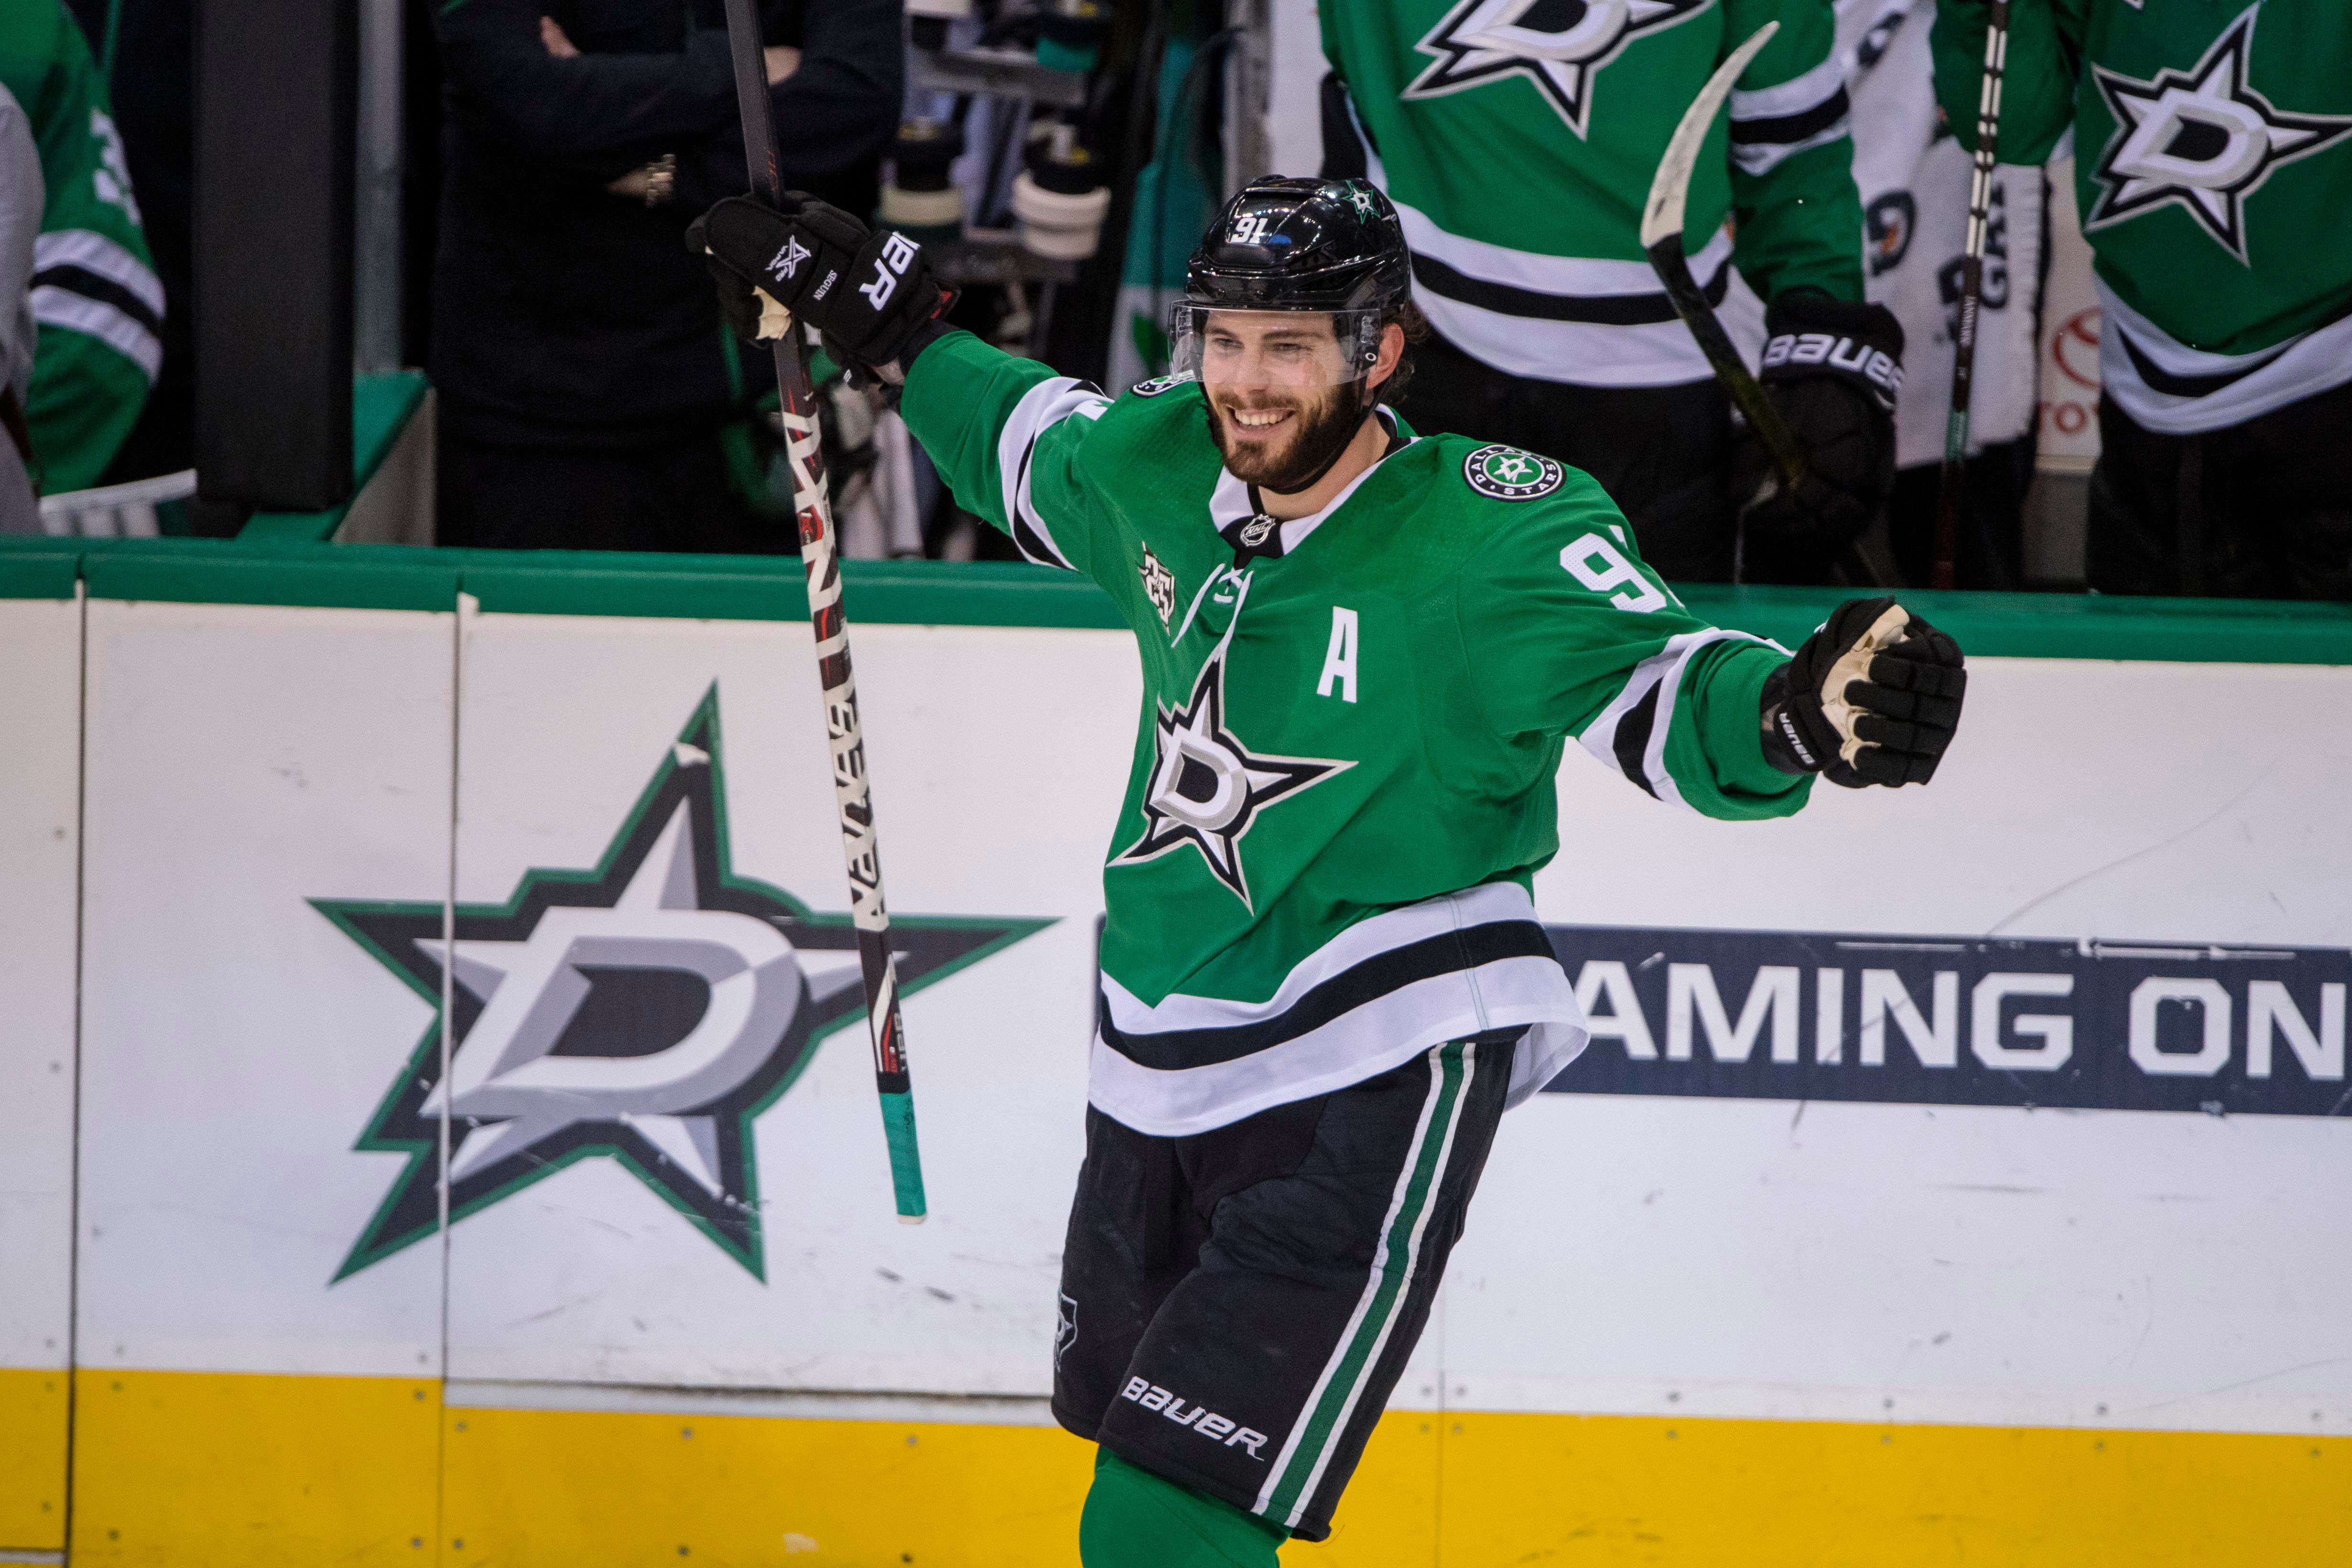 Stars Sign Seguin to Contract Extension #TopStory, #TylerSeguin